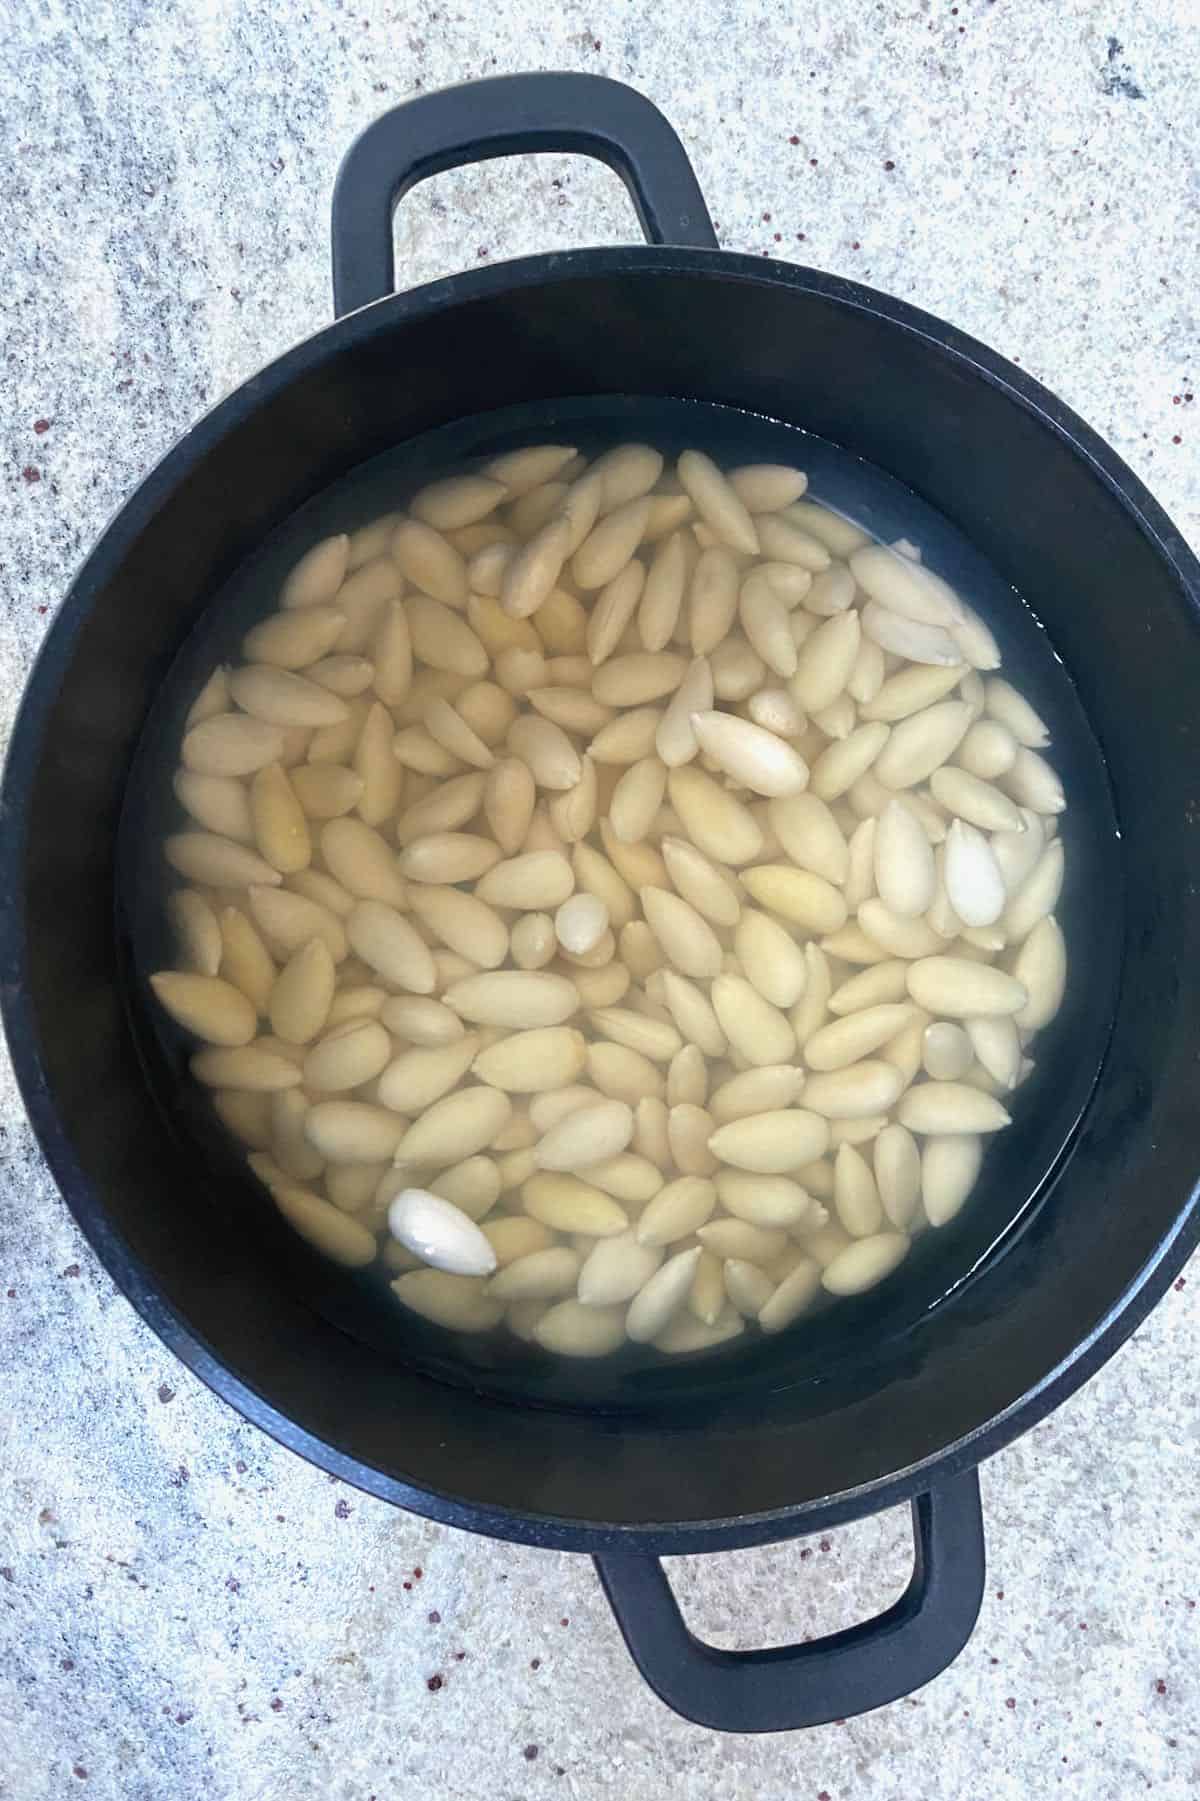 Soaking blanched almonds in a pot with water